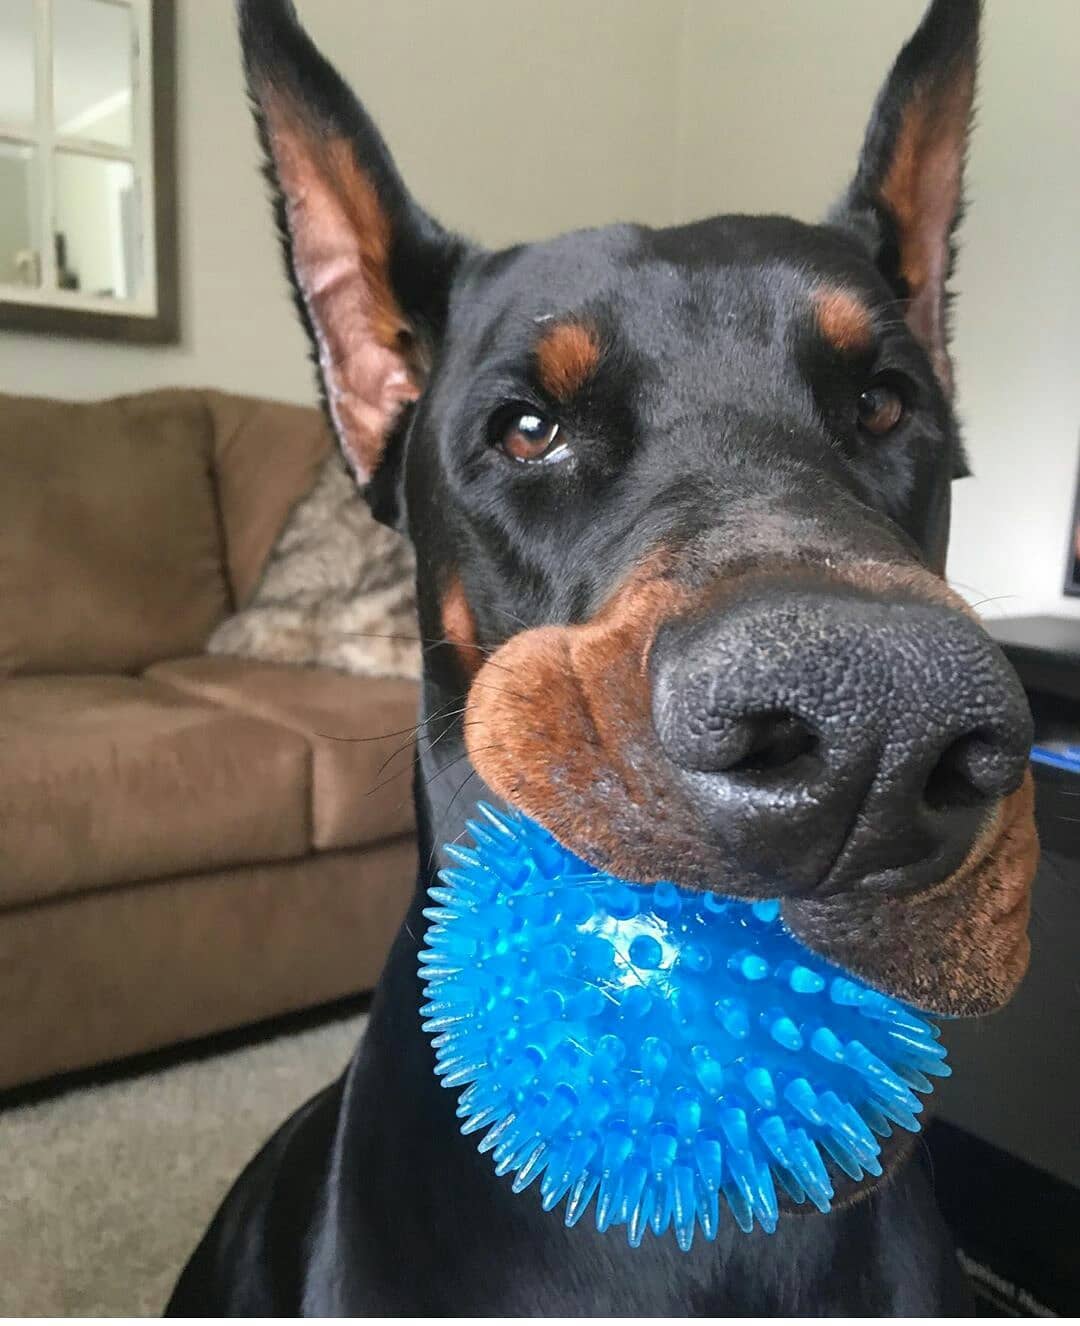 A Doberman sitting on the floor with a blue ball in its mouth